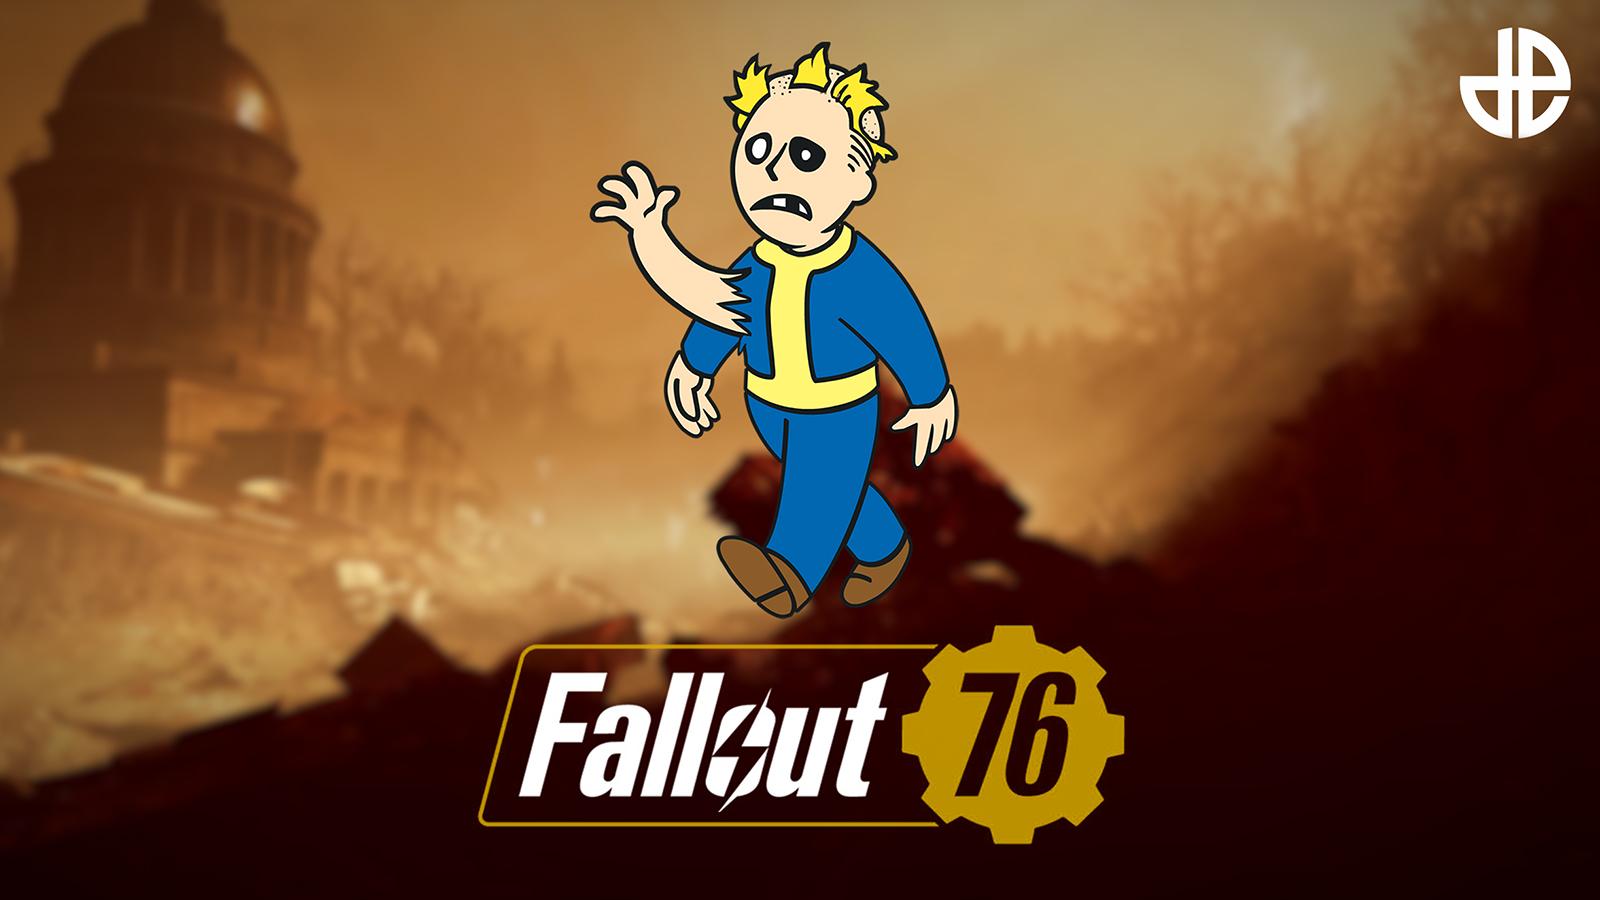 An image with the Fallout 76 logo and an icon of a mutation